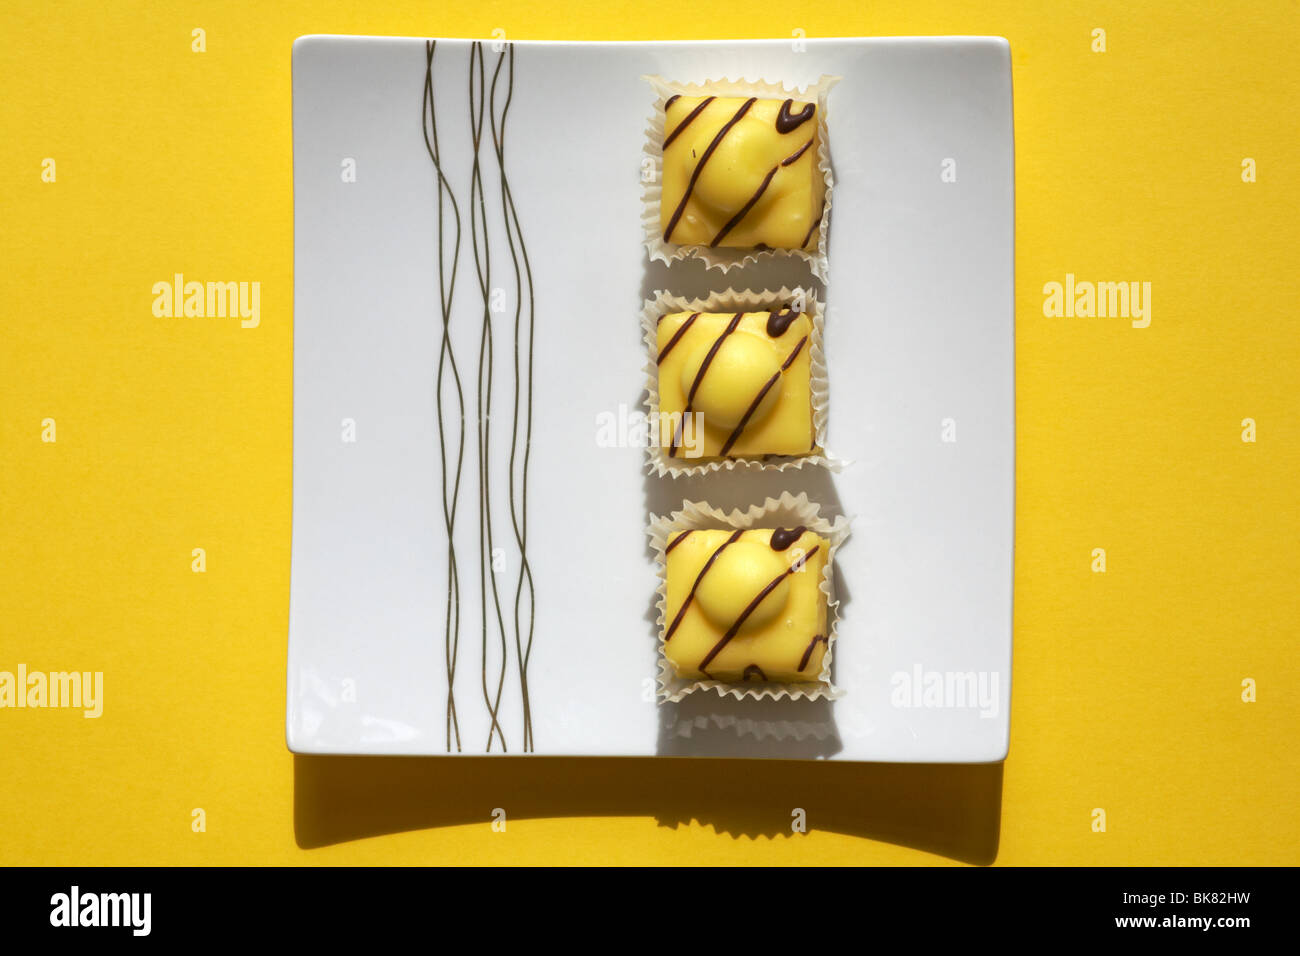 Three Special Edition Lemon French Fancies by Mr Kipling on white plate set on yellow background Stock Photo